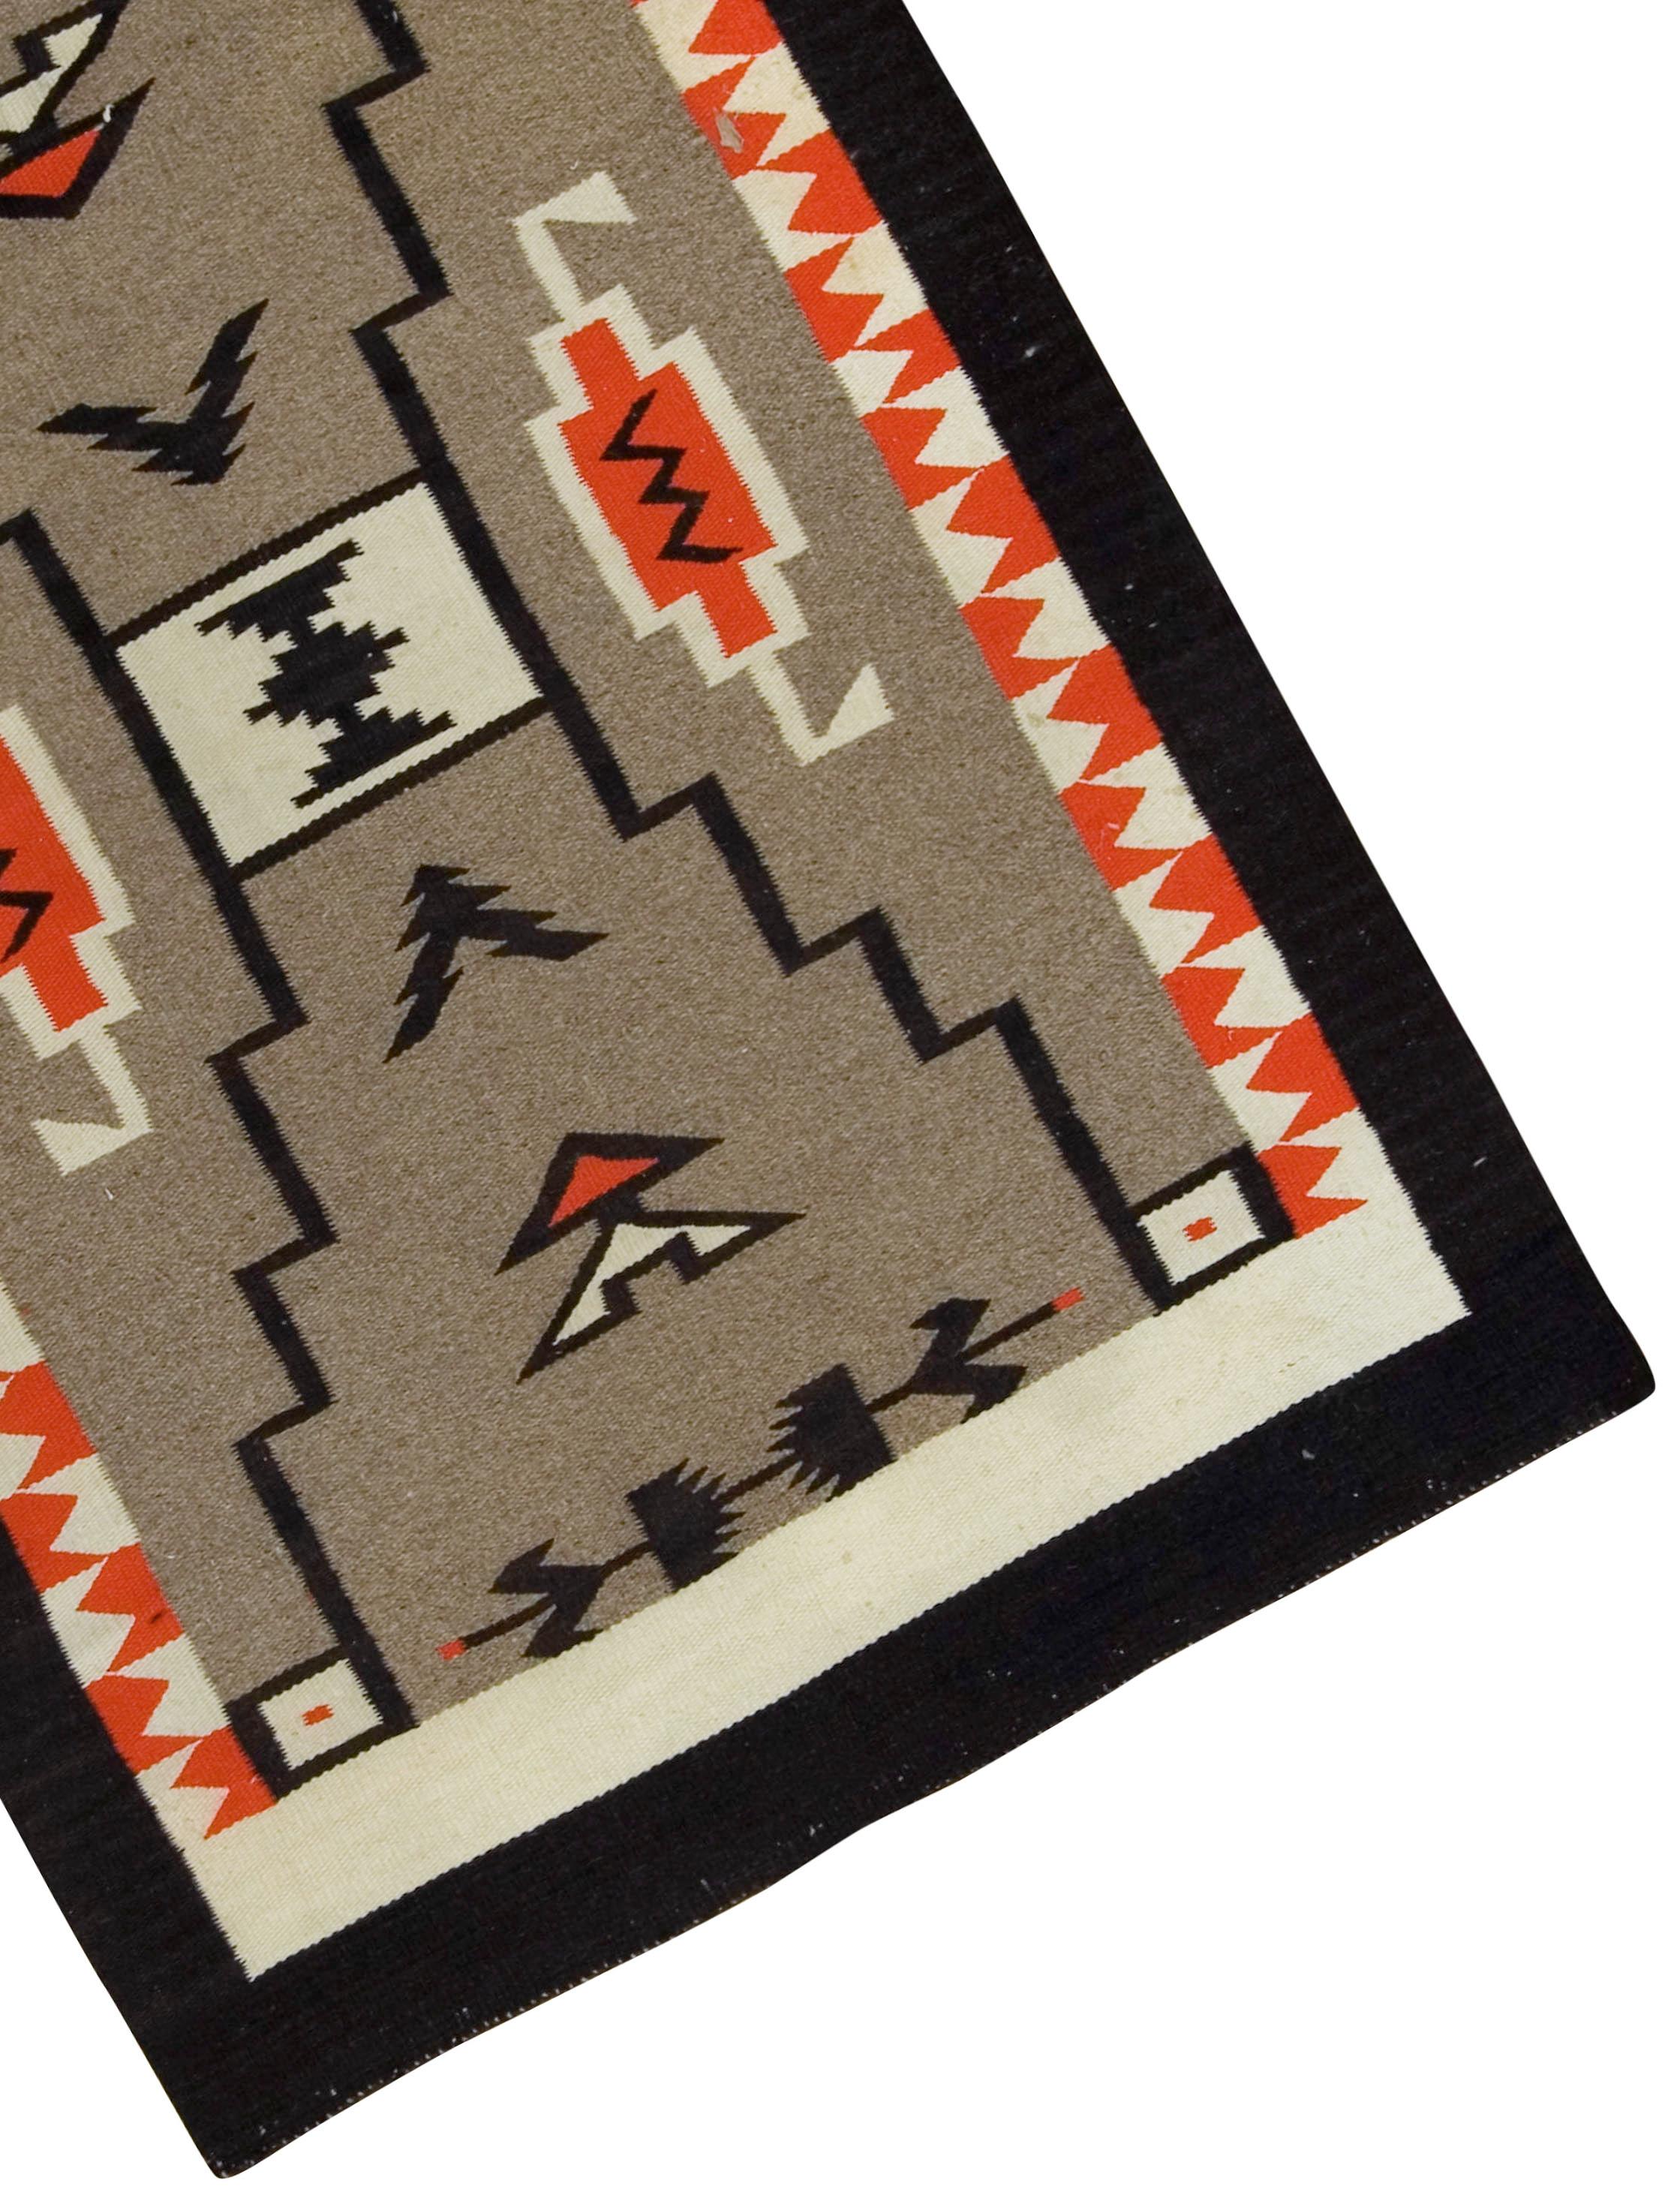 Antique Native American Navajo Rug 3'9 X 5'1. Antique Navajos are usually in scatter sizes and larger, room size pieces are both extremely rare and highly desirable . As perpetually fashionable as they are collectible, traditional Navajo rugs,